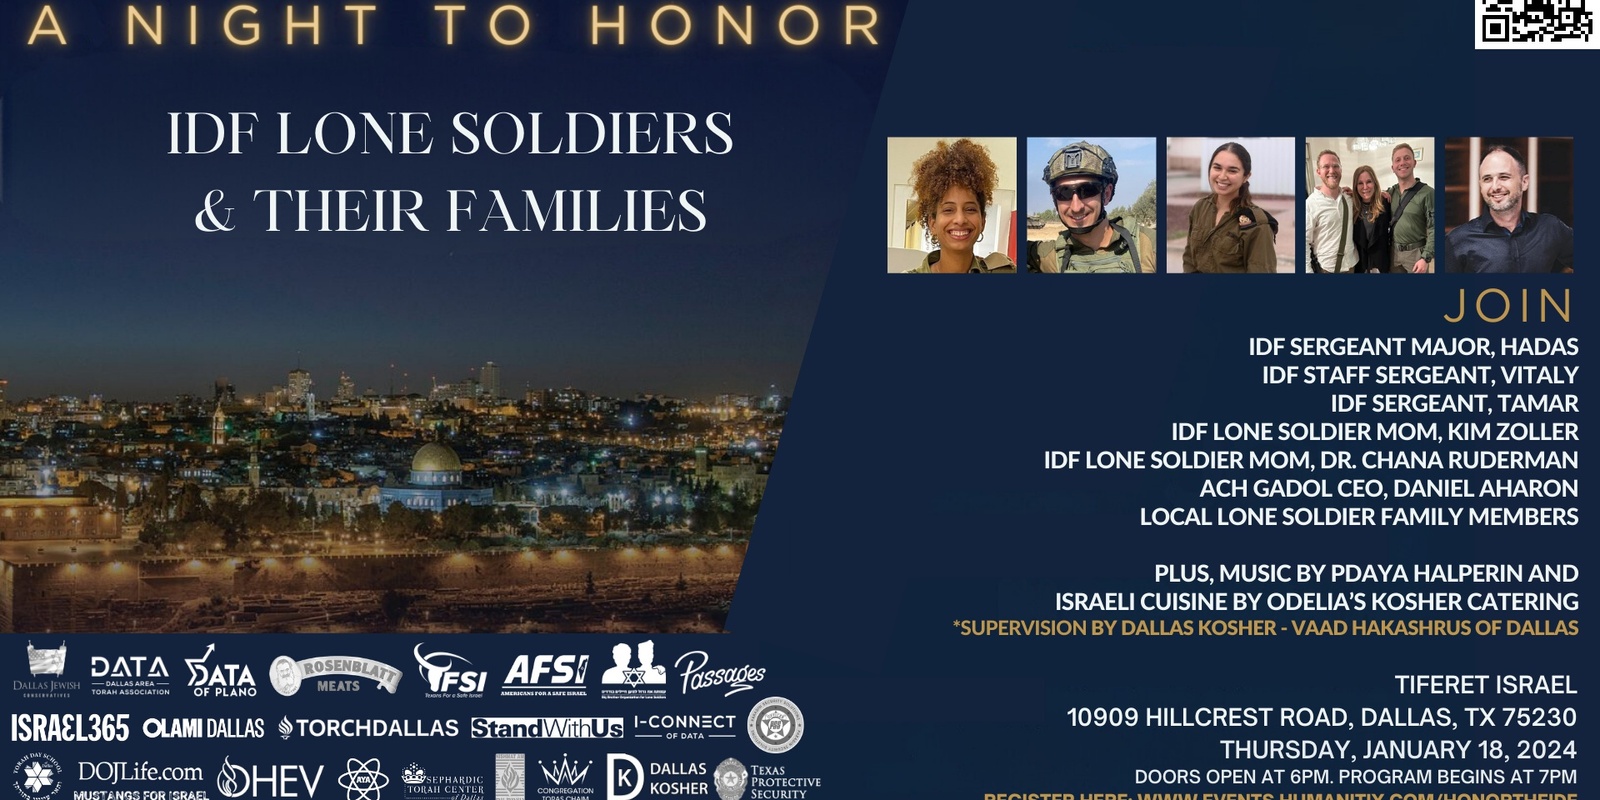 Banner image for A Night to Honor IDF Lone Soldiers & Their Families